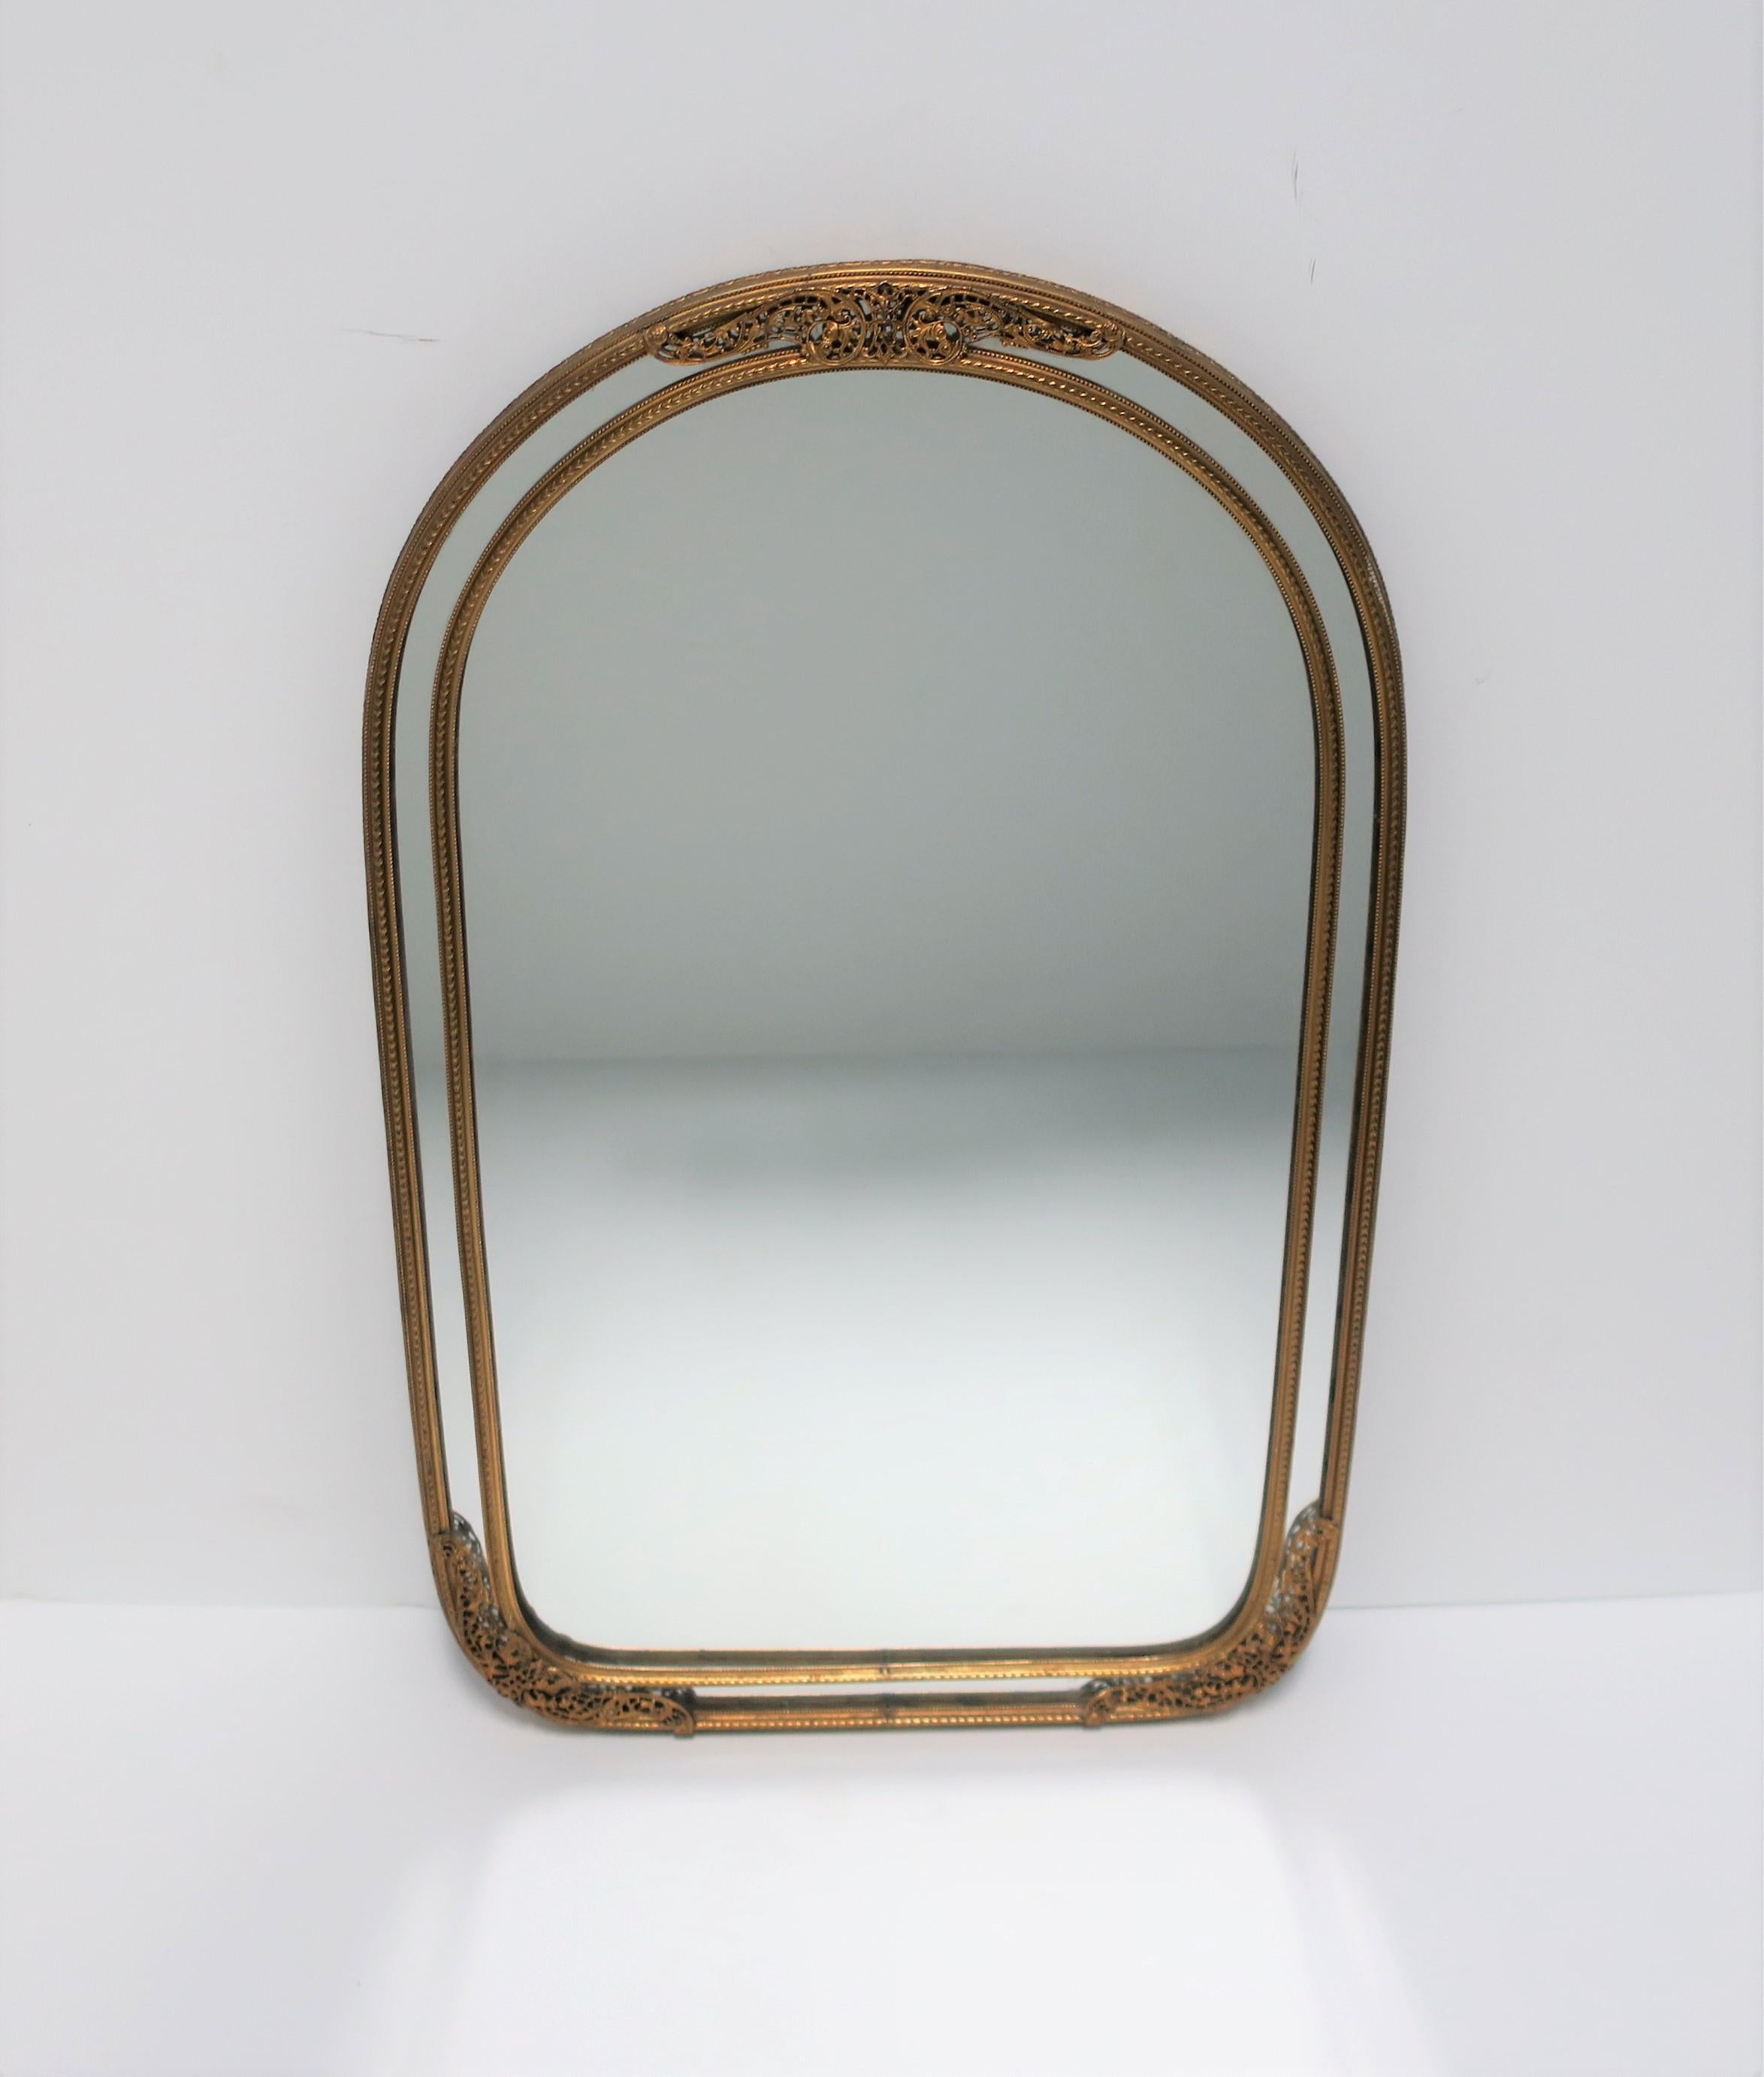 A beautiful and well-made European brass wall mirror, circa early to mid-20th century, Europe. Beautiful, small details are all around this quality brass frame. Mirror is on the smaller side of typical wall mirrors; piece would work well where a